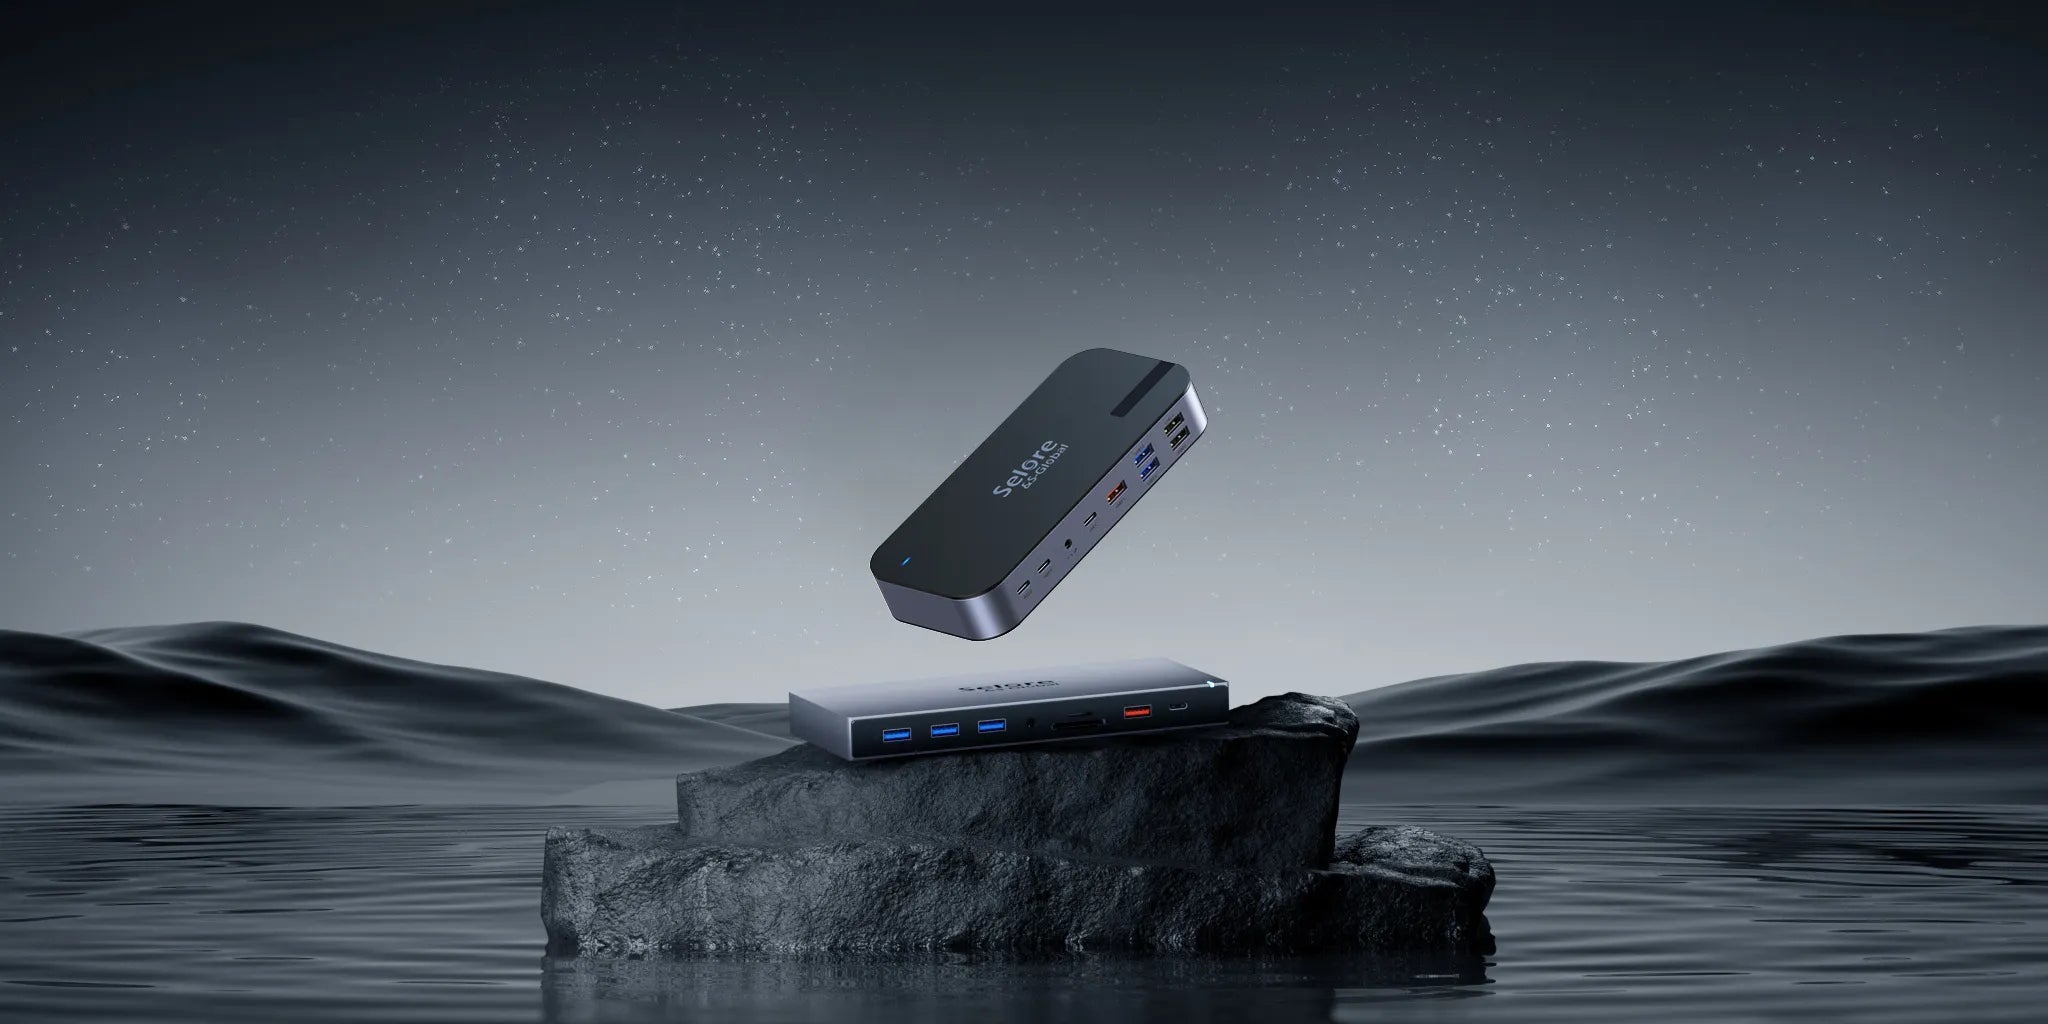  Take your device connectivity to the next level with Selore docking stations.